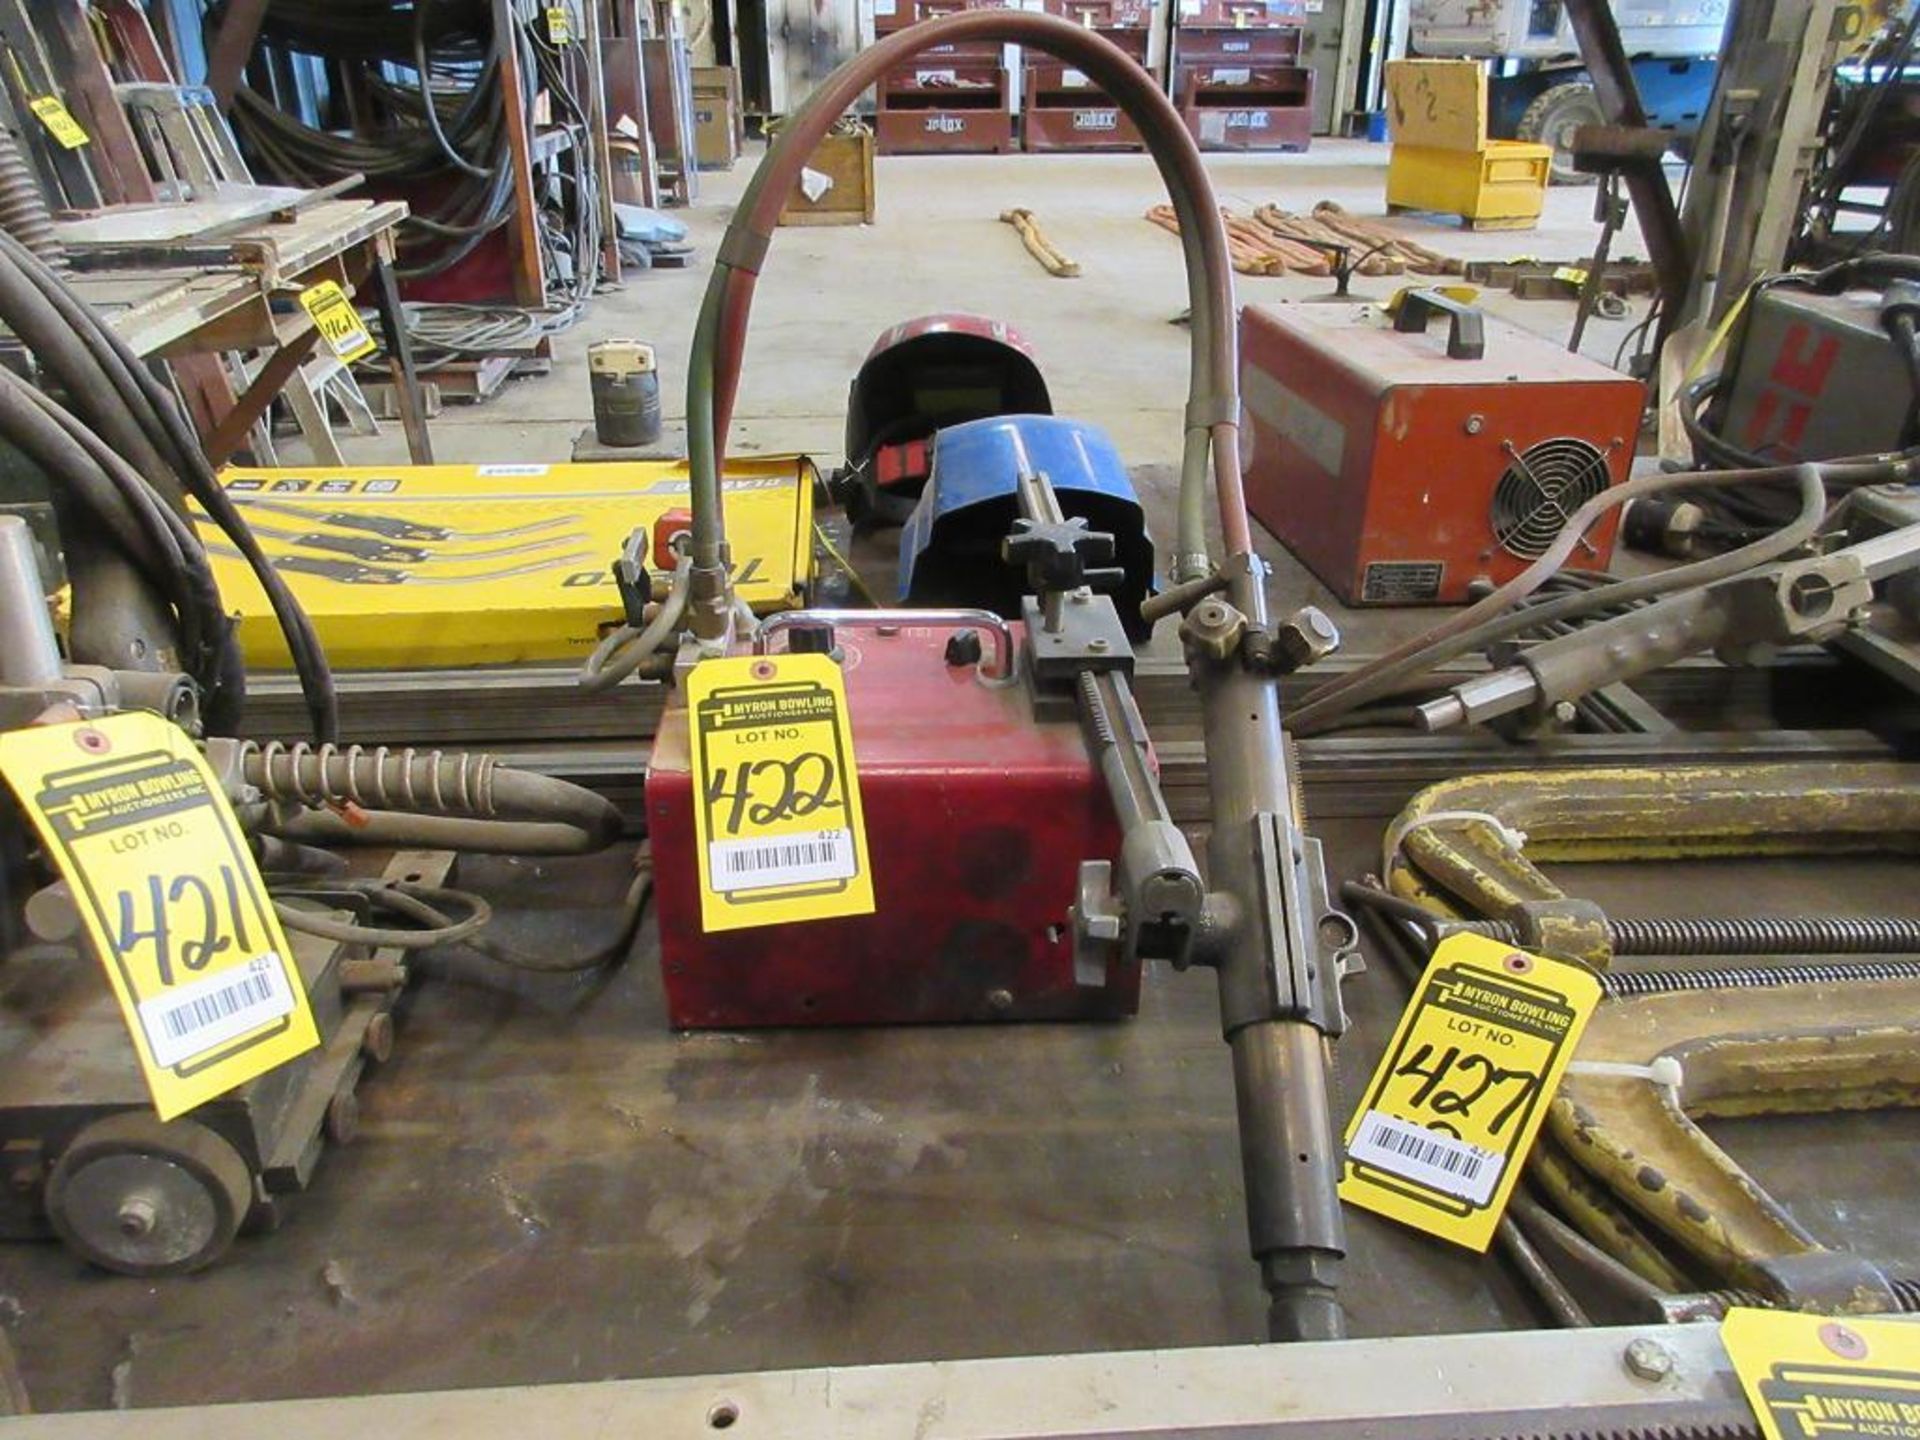 BUG-O SYSTEMS MODEL HAR-3240-HS TRACK WELDER W/ APPROX. 8' OF TRACK